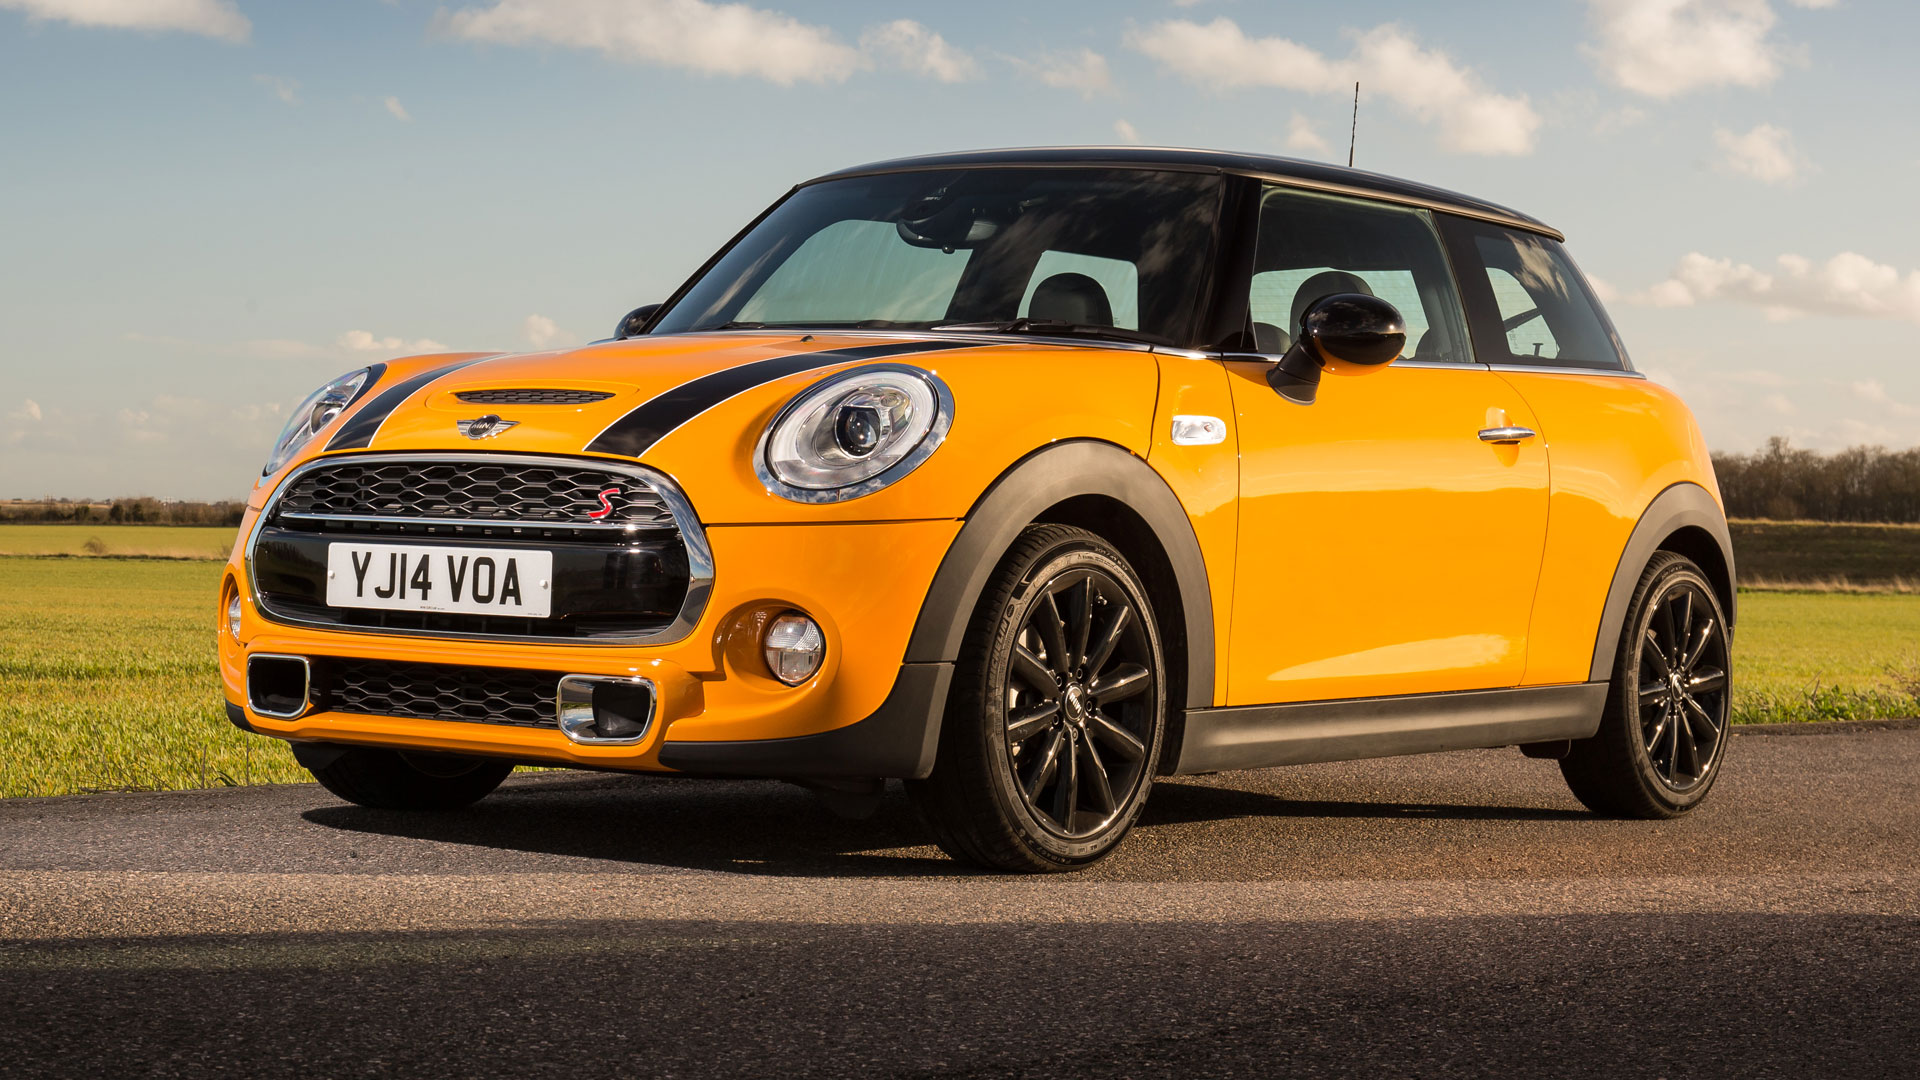 Mini Cooper D 2018 - Price, Mileage, Reviews, Specification, Gallery ...